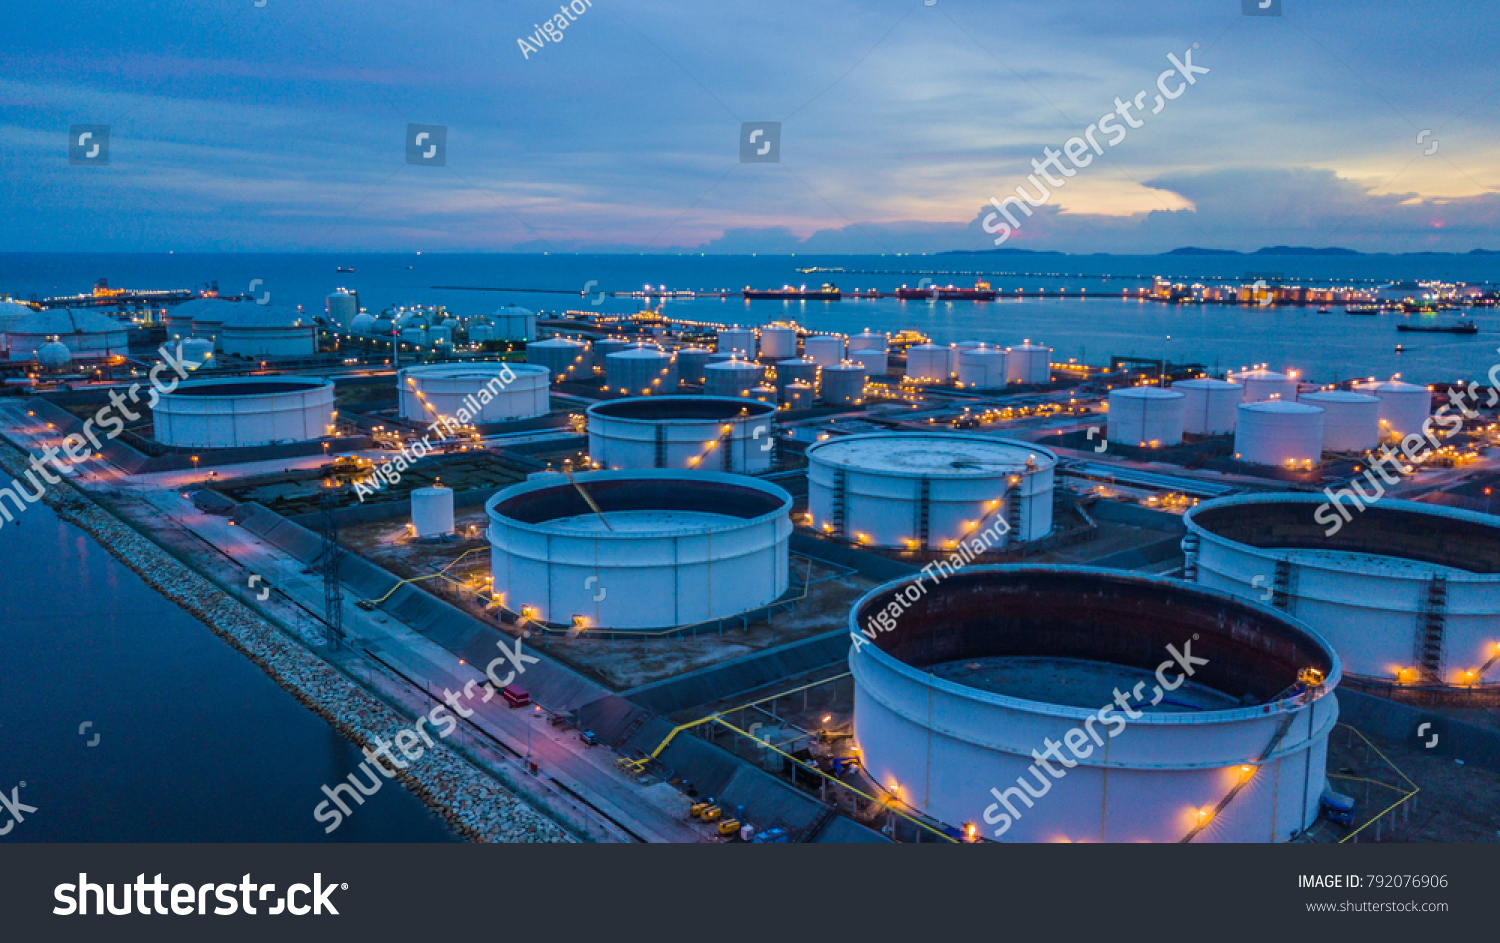 Aerial view storage tank farm at night, Tank farm storage chemical petroleum petrochemical refinery product at oil terminal, Business commercial trade fuel and energy transport by tanker vessel. #792076906